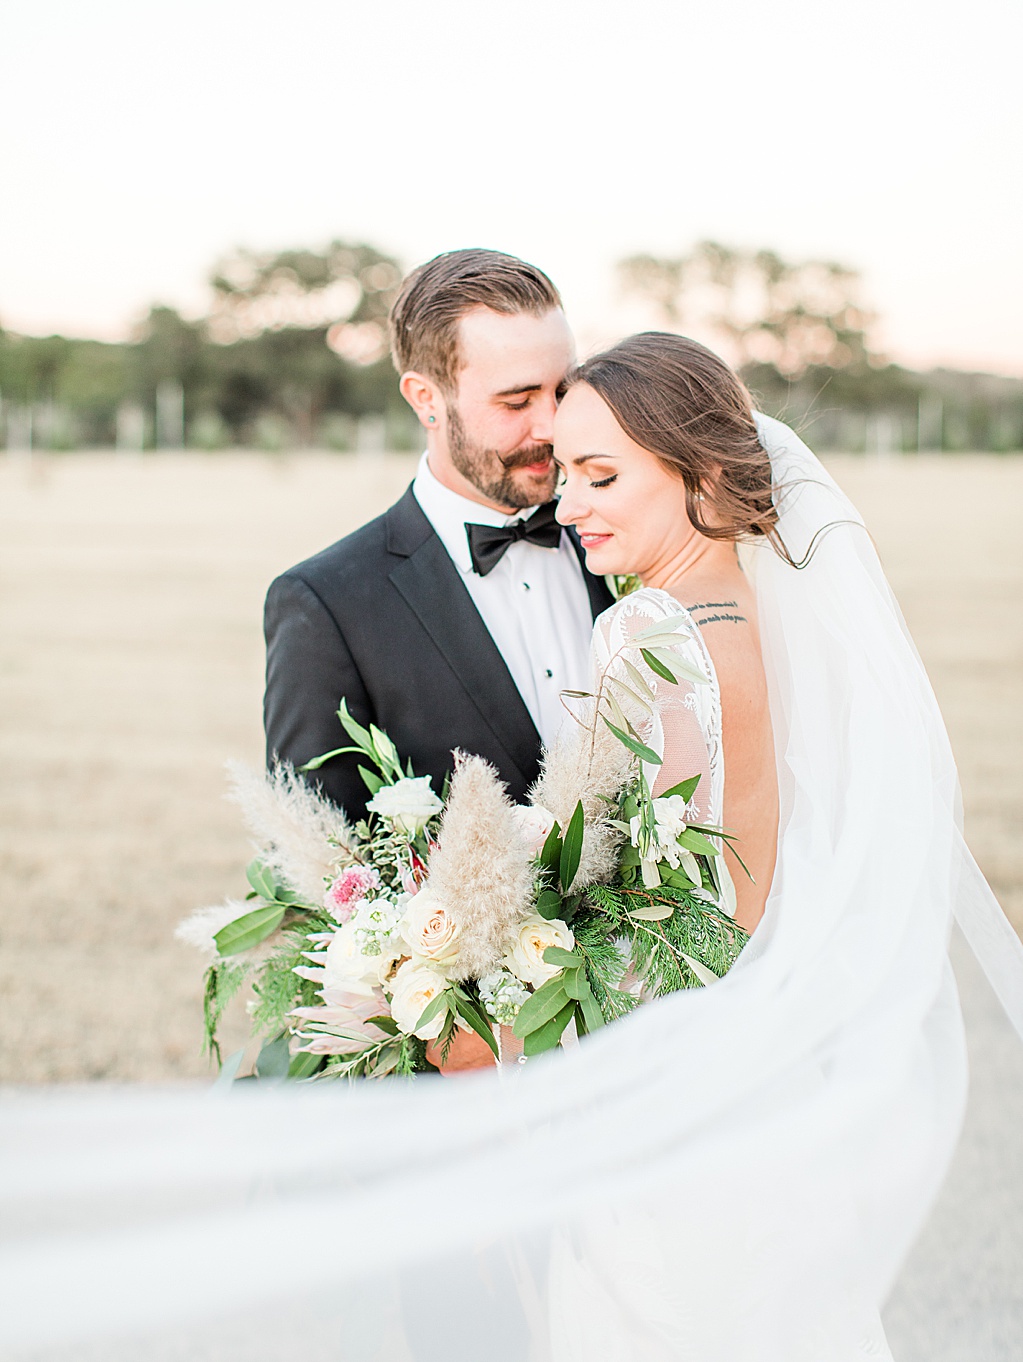 Hill Country Wedding at Turtle Creek Olive Grove wedding venue in Kerrville Texas by Wedding Photographer Allison Jeffers 0096